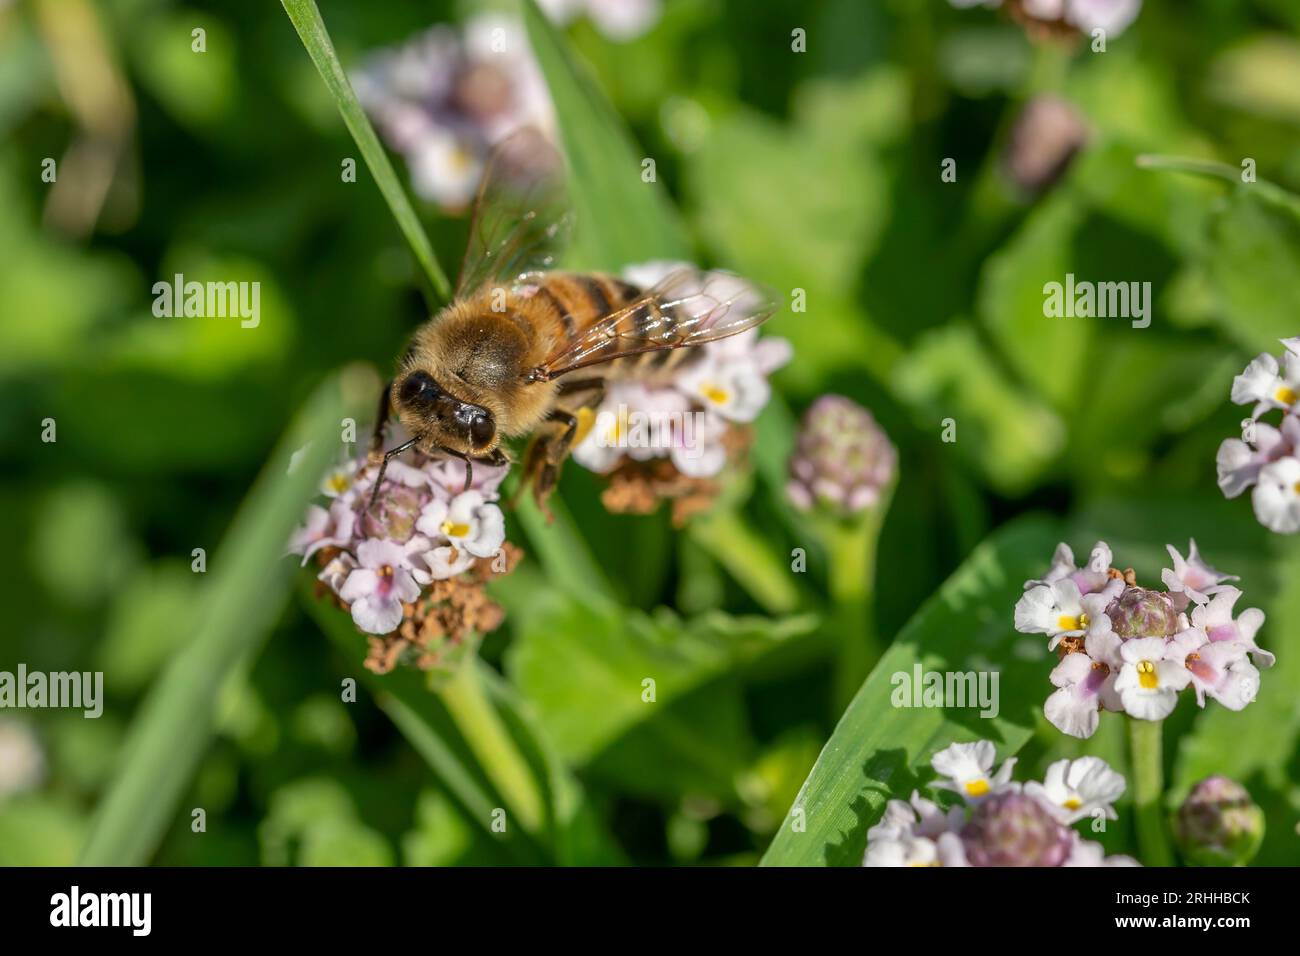 A bee on a flower of Phyla nodiflora, commonly known as the Turkey Tangle Fogfruit, in a green meadow Stock Photo